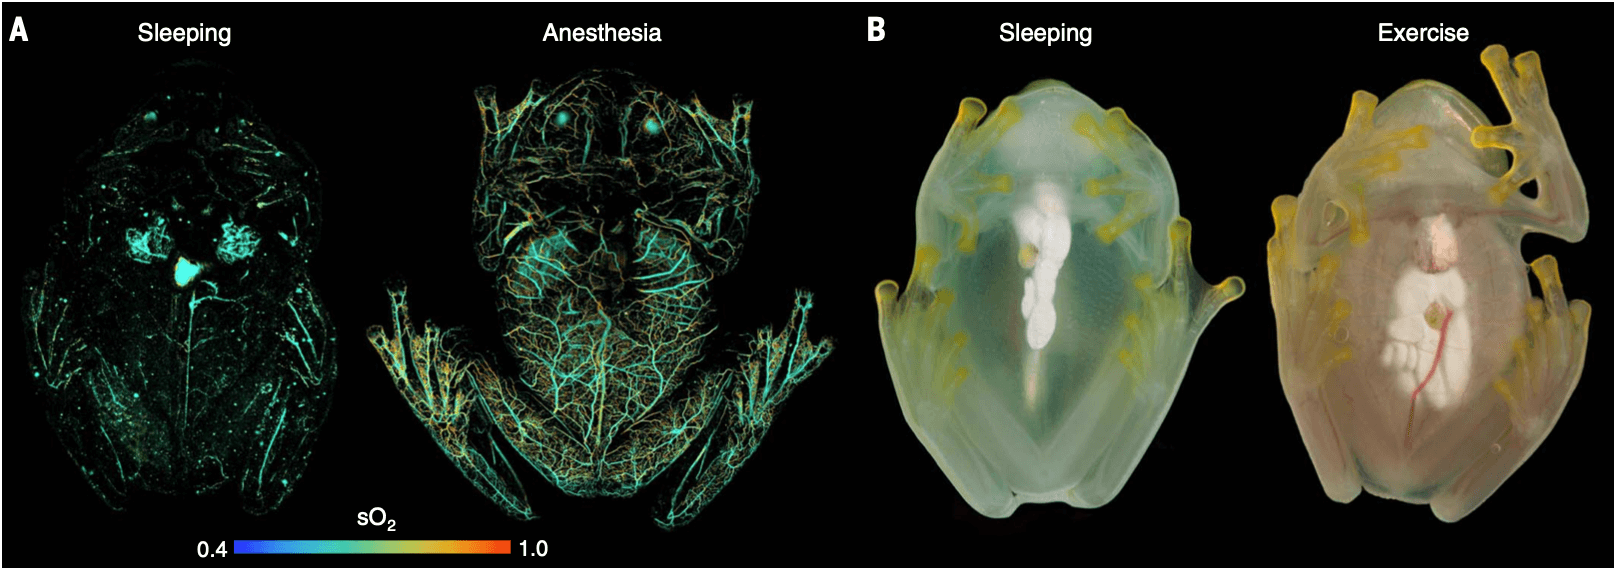 Glassfrogs remove RBCs from circulation while sleeping. (A) High-resolution PAM showing RBC perfusion within the vasculature of the same frog while asleep and under anesthesia. This PAM technique can capture the location of RBCs within single vessels, as well as the oxygen saturation of hemoglobin (sO2). (B) Flash photography showing the visible change in RBC perfusion between activity levels. 